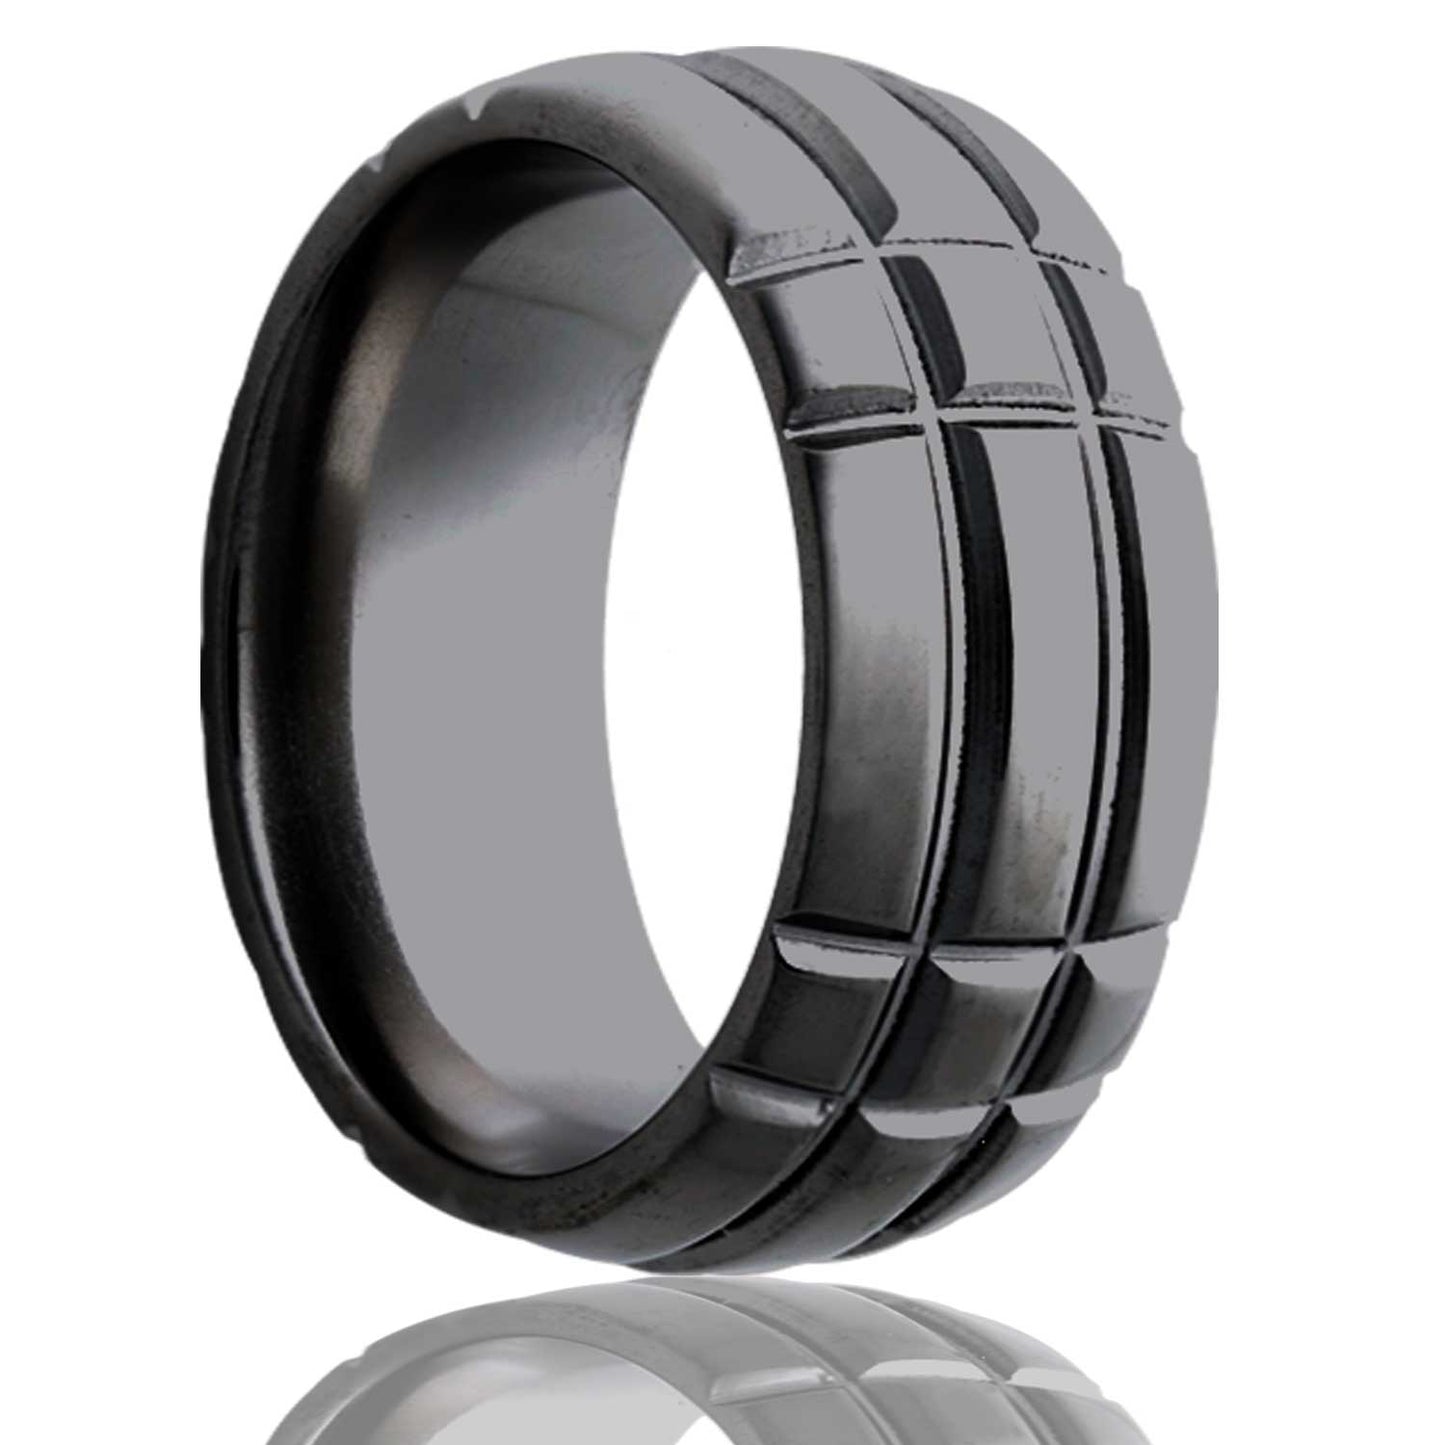 A intersecting grooves domed zirconium men's wedding band displayed on a neutral white background.